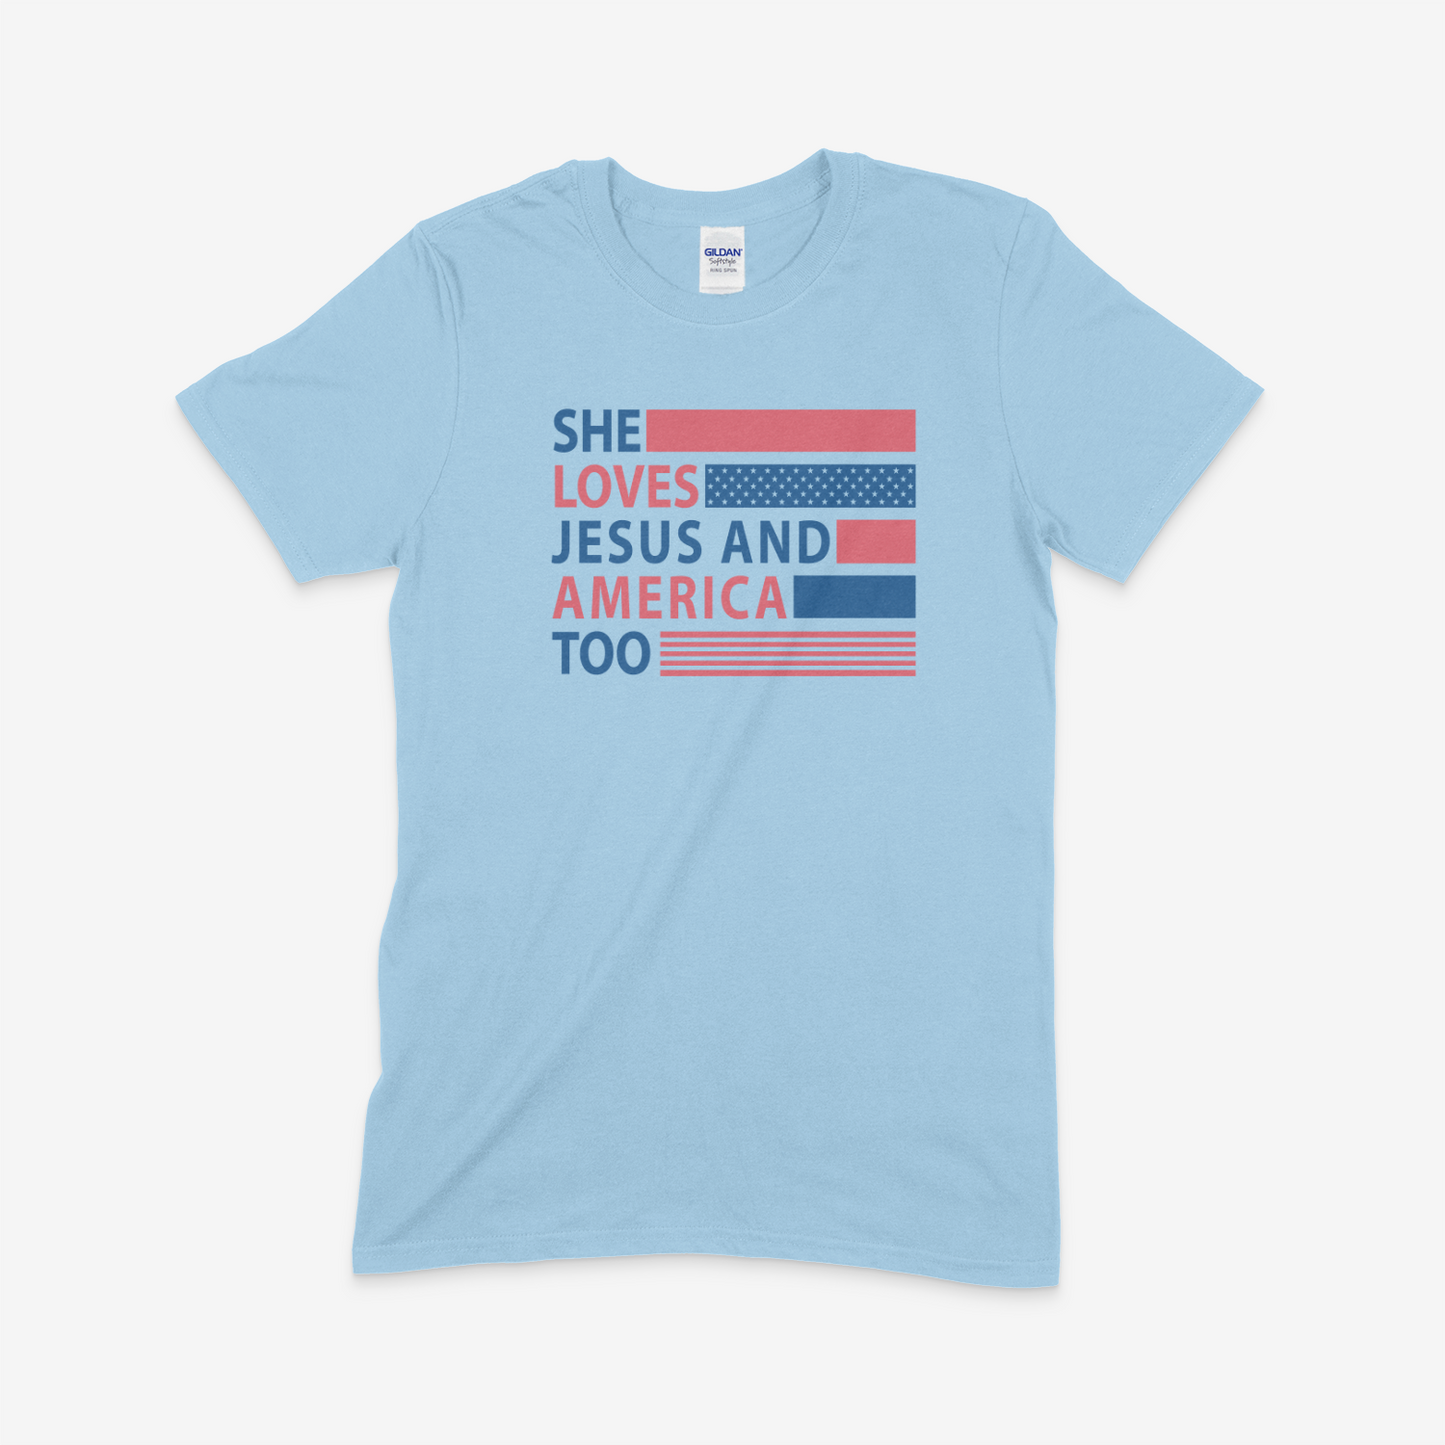 She Loves Jesus and America Too - Gildan Softstyle